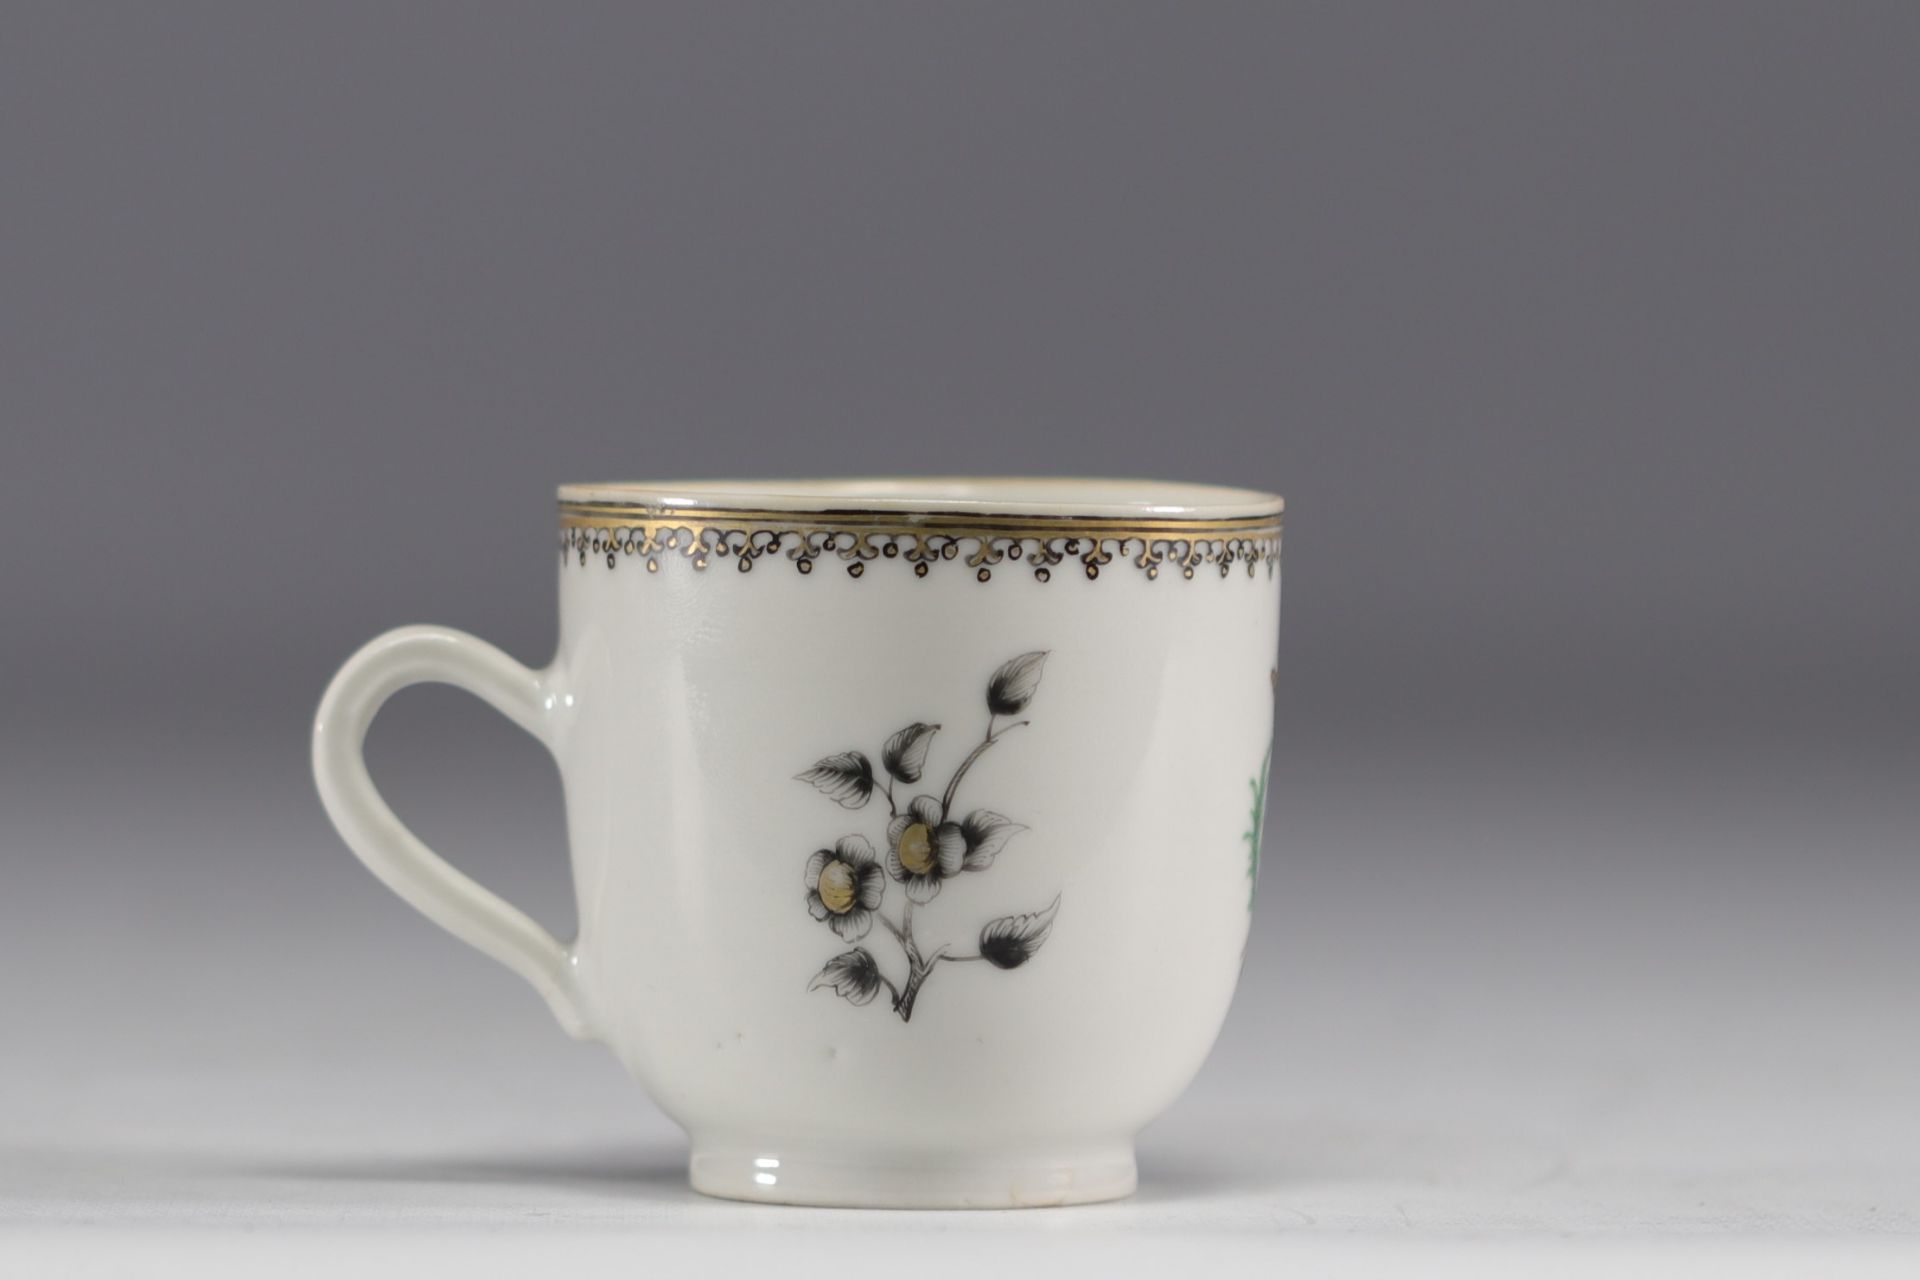 China - A Compagnie des Indes "Grisaille" porcelain cup decorated with a coat of arms and flowers, 1 - Image 2 of 4